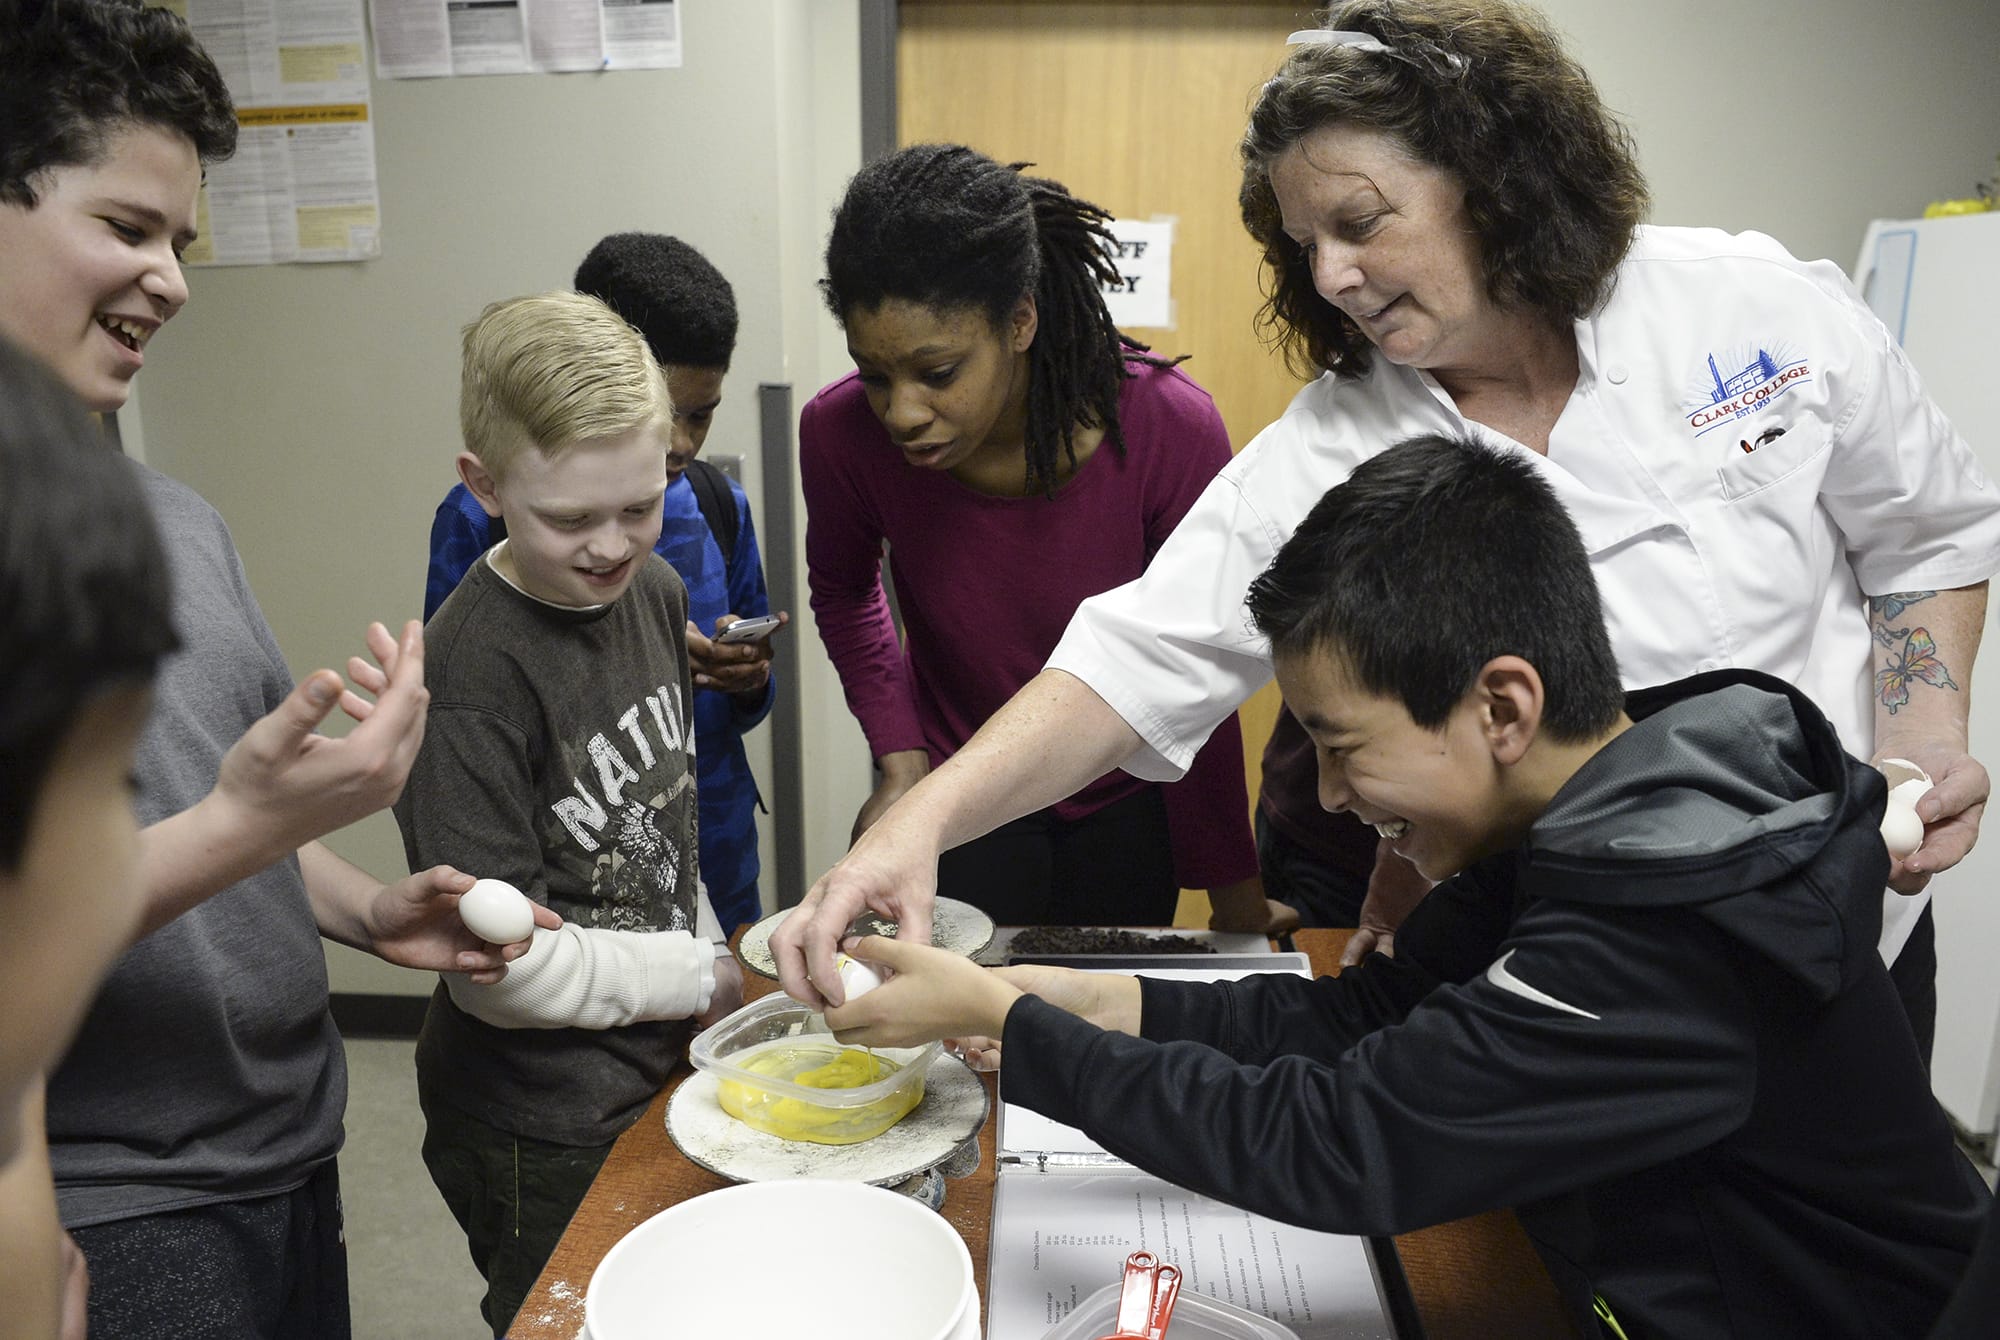 Alison Dolder, department head for professional baking and pastry arts at Clark College, right, helps sixth-grader Eduardo Castellon, right, crack an egg while Eduardo Santos, left, Jaden Cleere and Janoah Stegall watch nearby during a baking lesson at the Boys & Girls Clubs of Southwest Washington in April 2017.